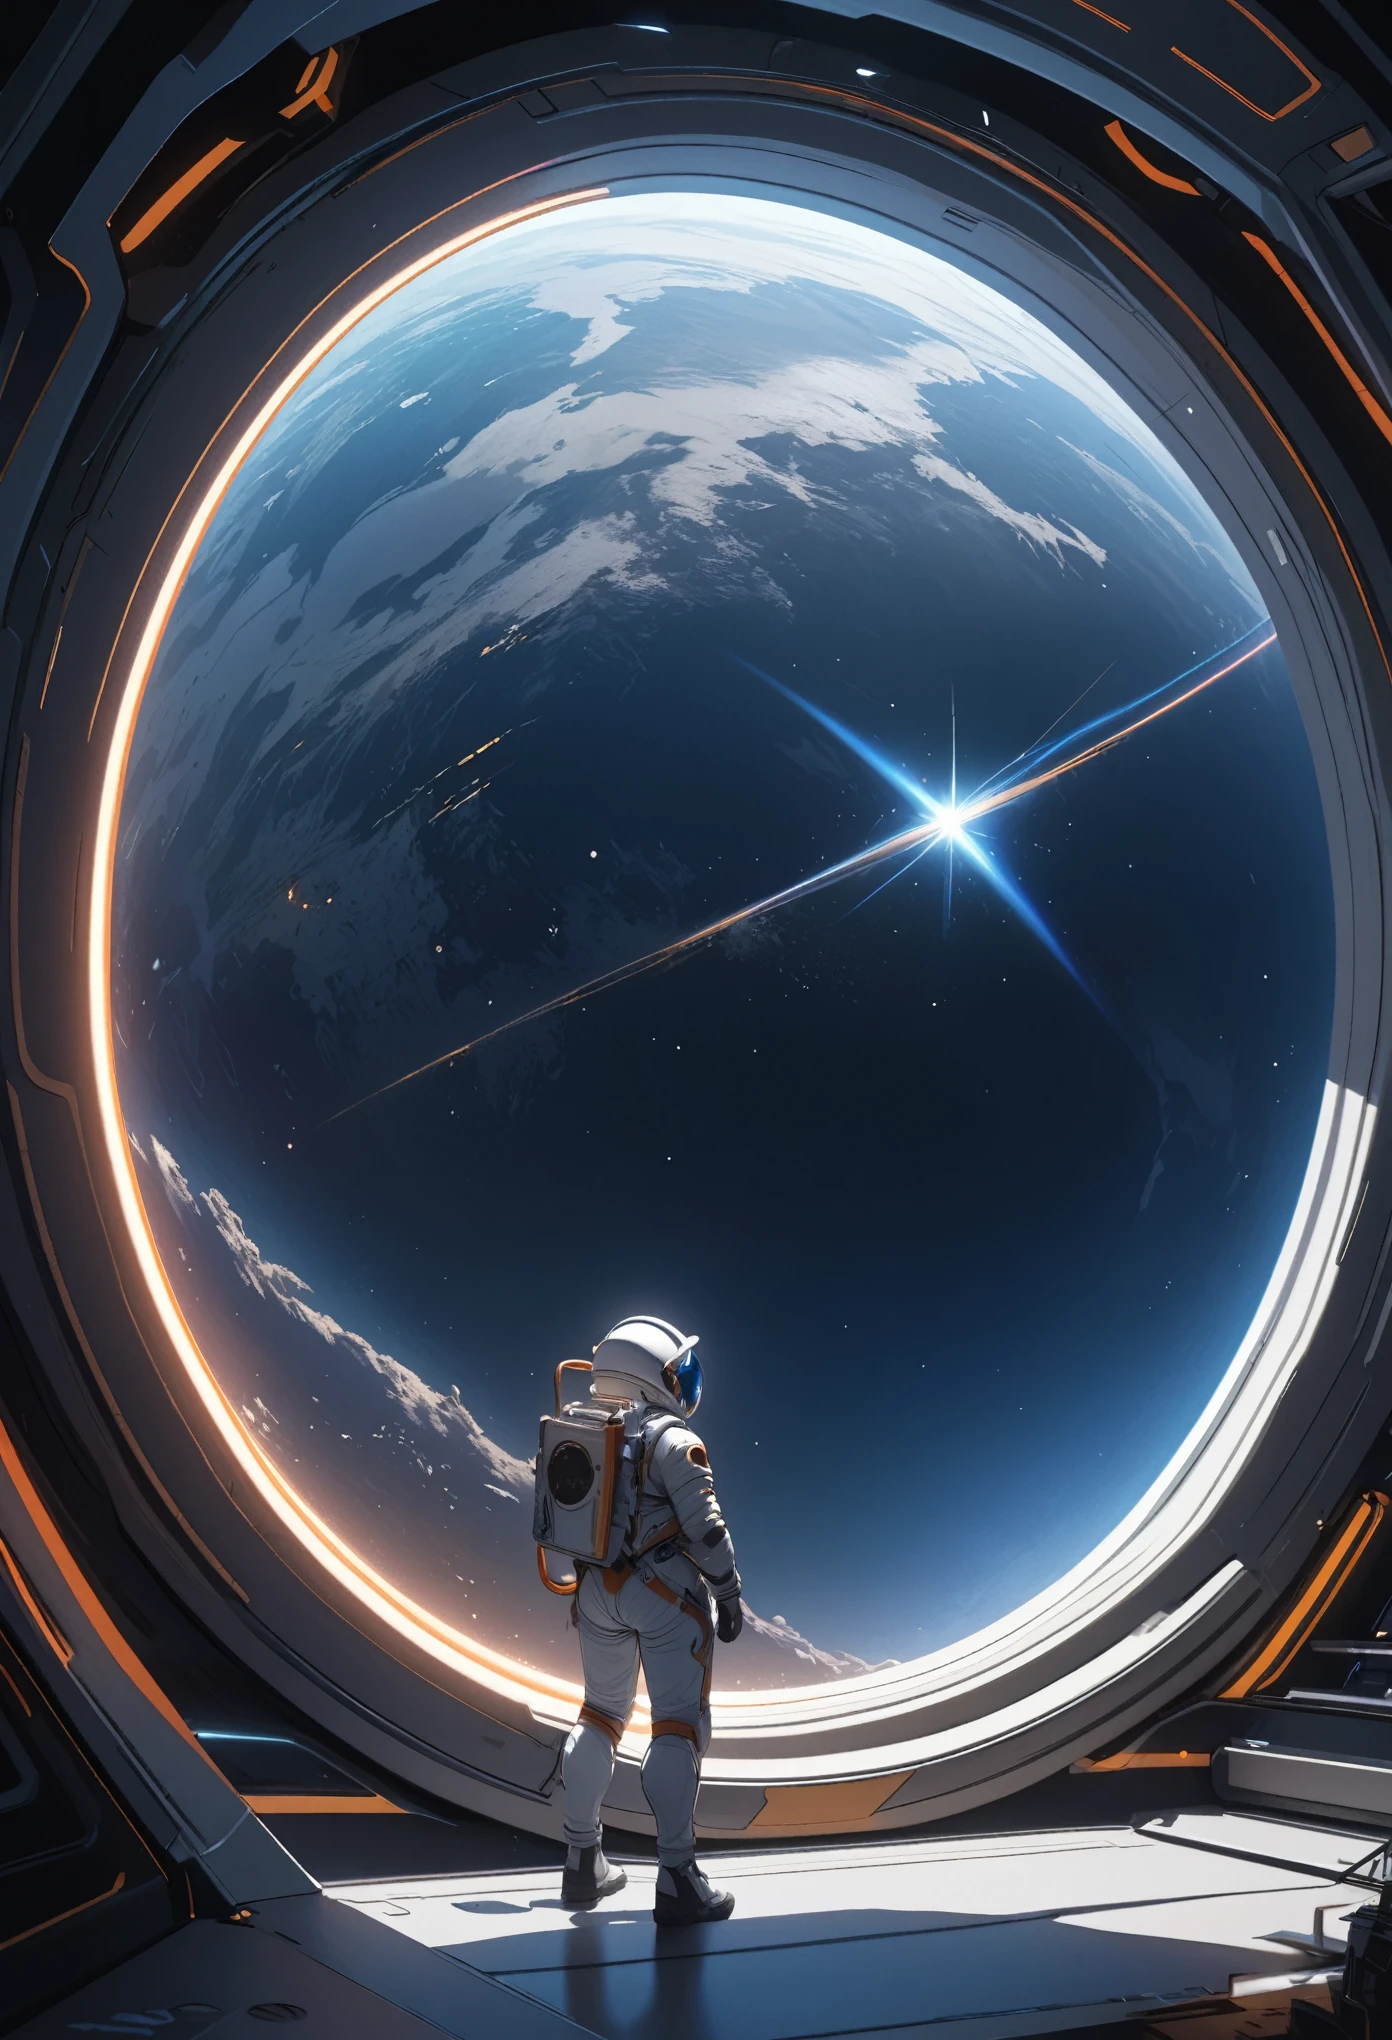 (best quality, 4k, ultra detailed, high resolution, masterpiece: 1.2),Personaje a la Distancia: Hay un personaje visto desde lejos, located at a high observation point. It is small compared to the surroundings, resaltando la magnitud de la nave. The character is equipped with a space suit, with flashing lights and mechanical details.
Vista del Espacio Exterior: Through the openings in the ship, se ve un vasto espacio estrellado. The stars are unevenly distributed, creating variable densities and suggesting the remoteness of some celestial objects.